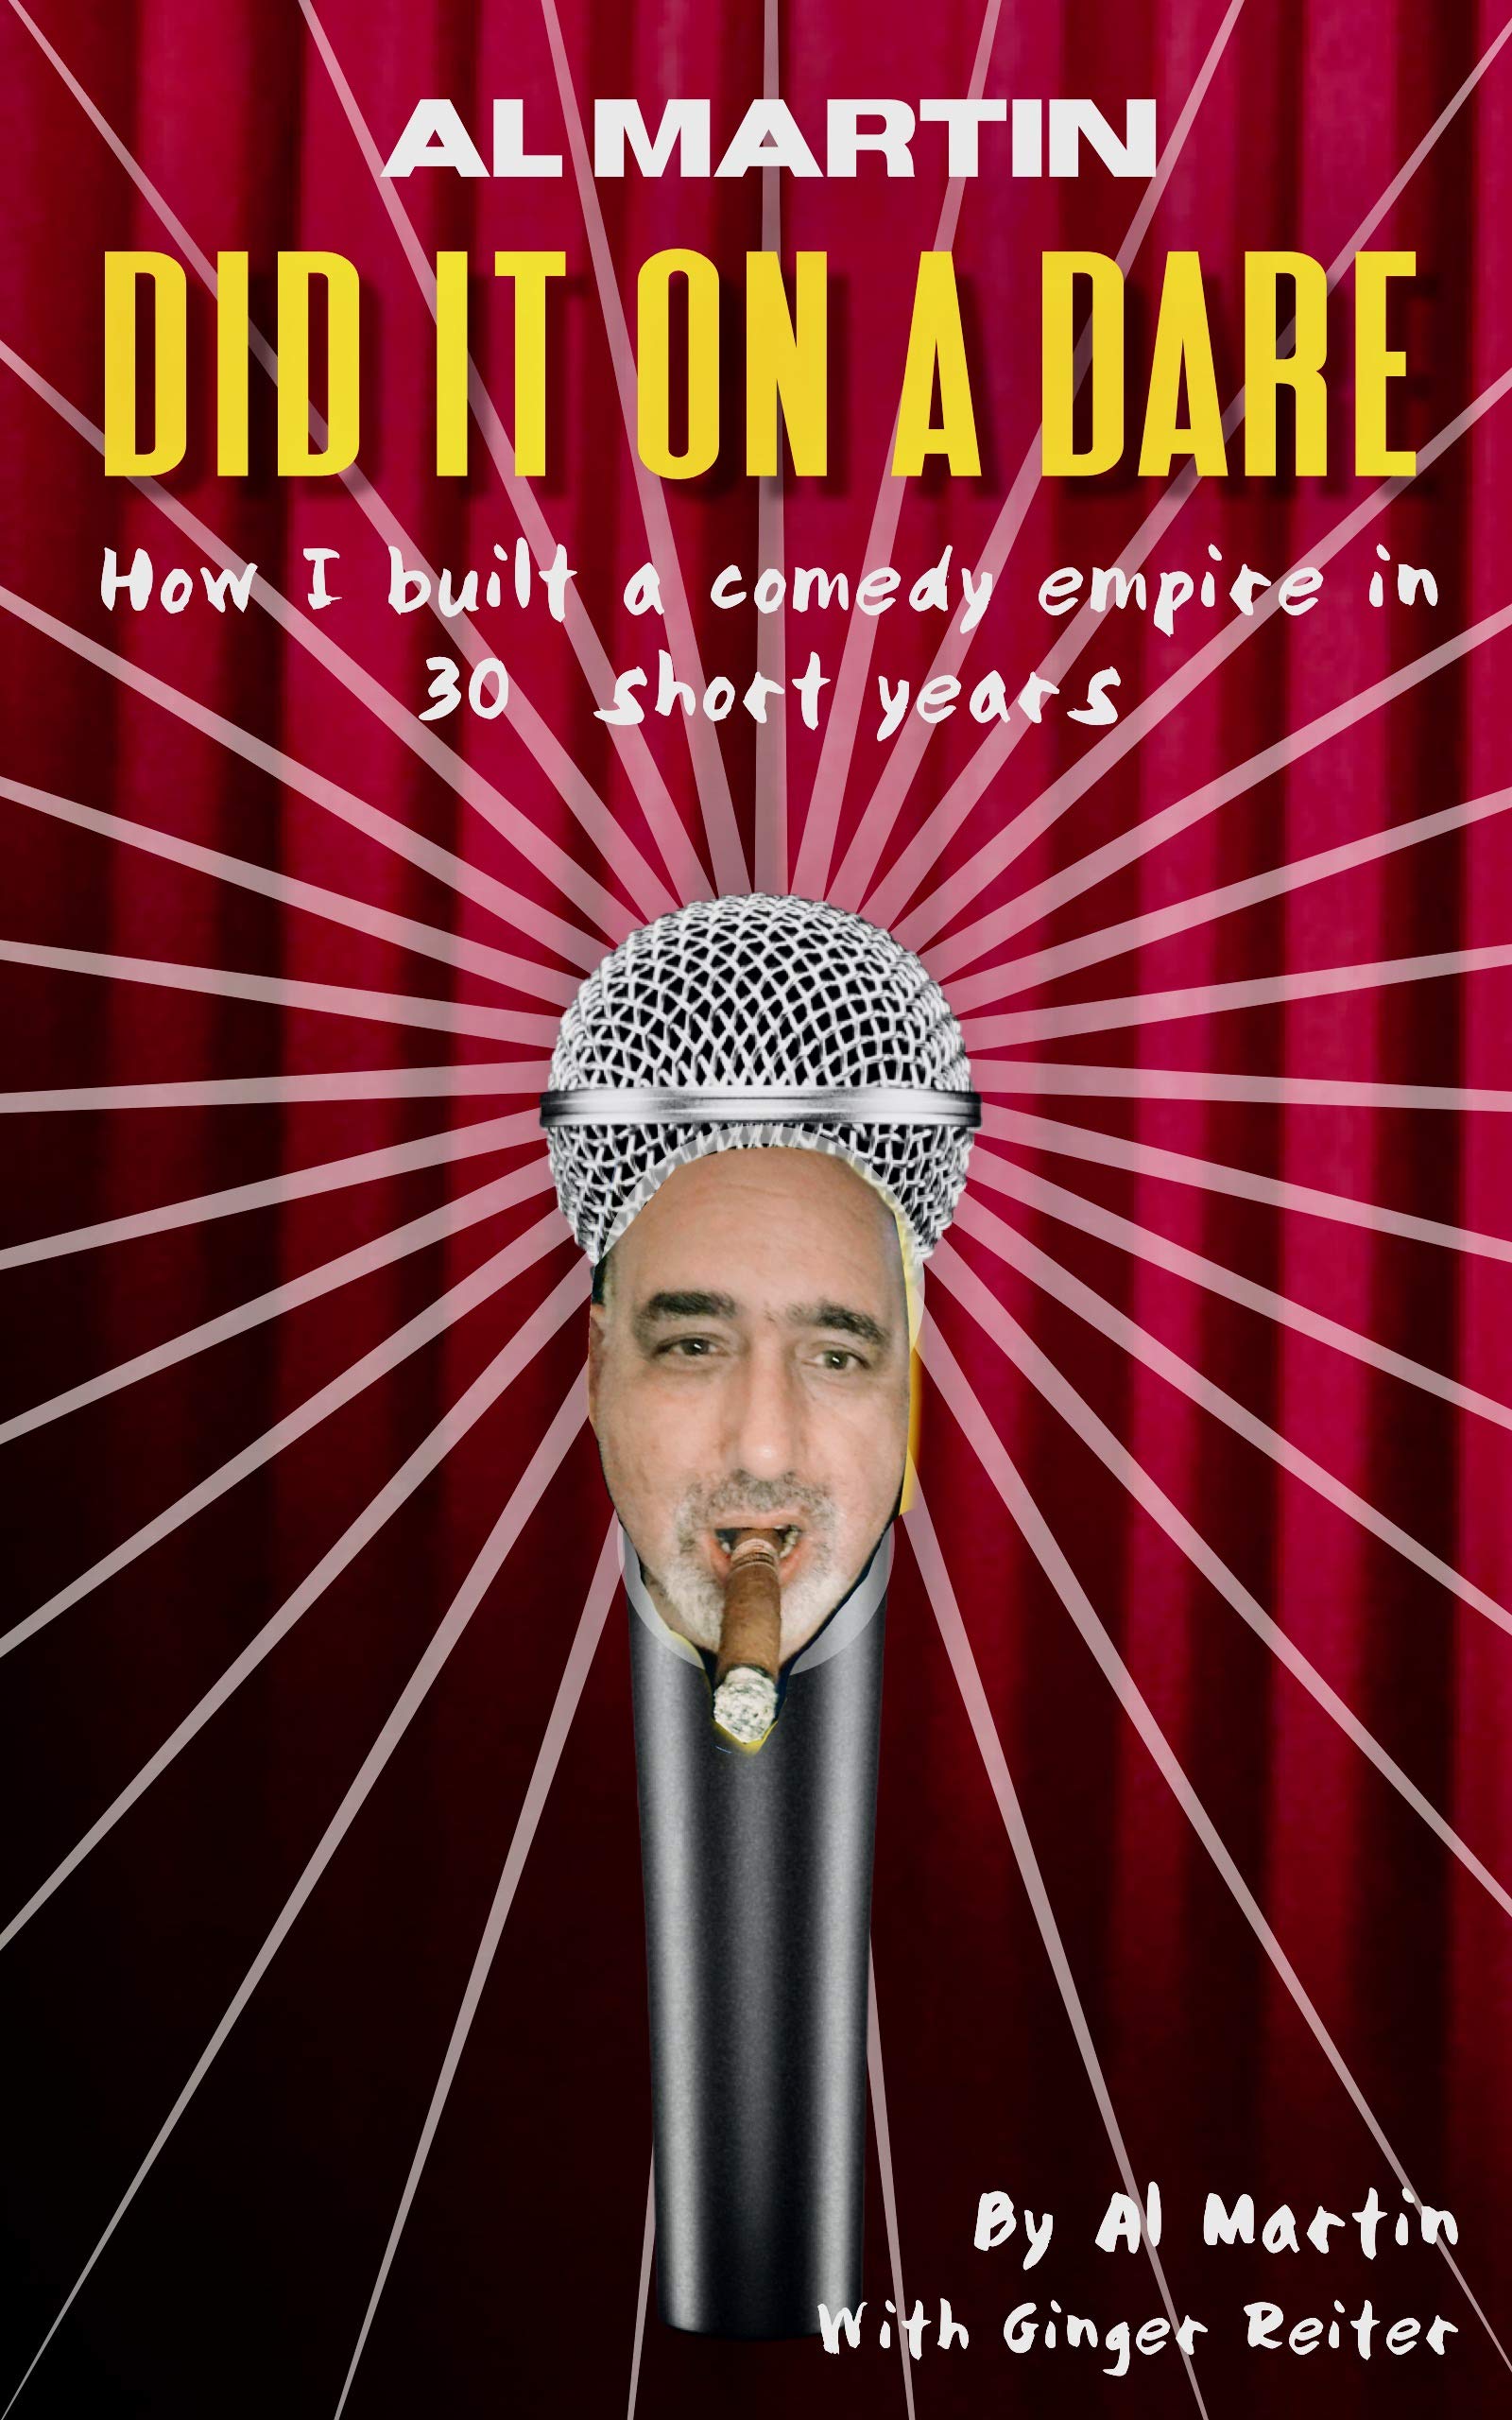 I DID IT ON A DARE: How I Created a Comedy Empire in 30 Short Years